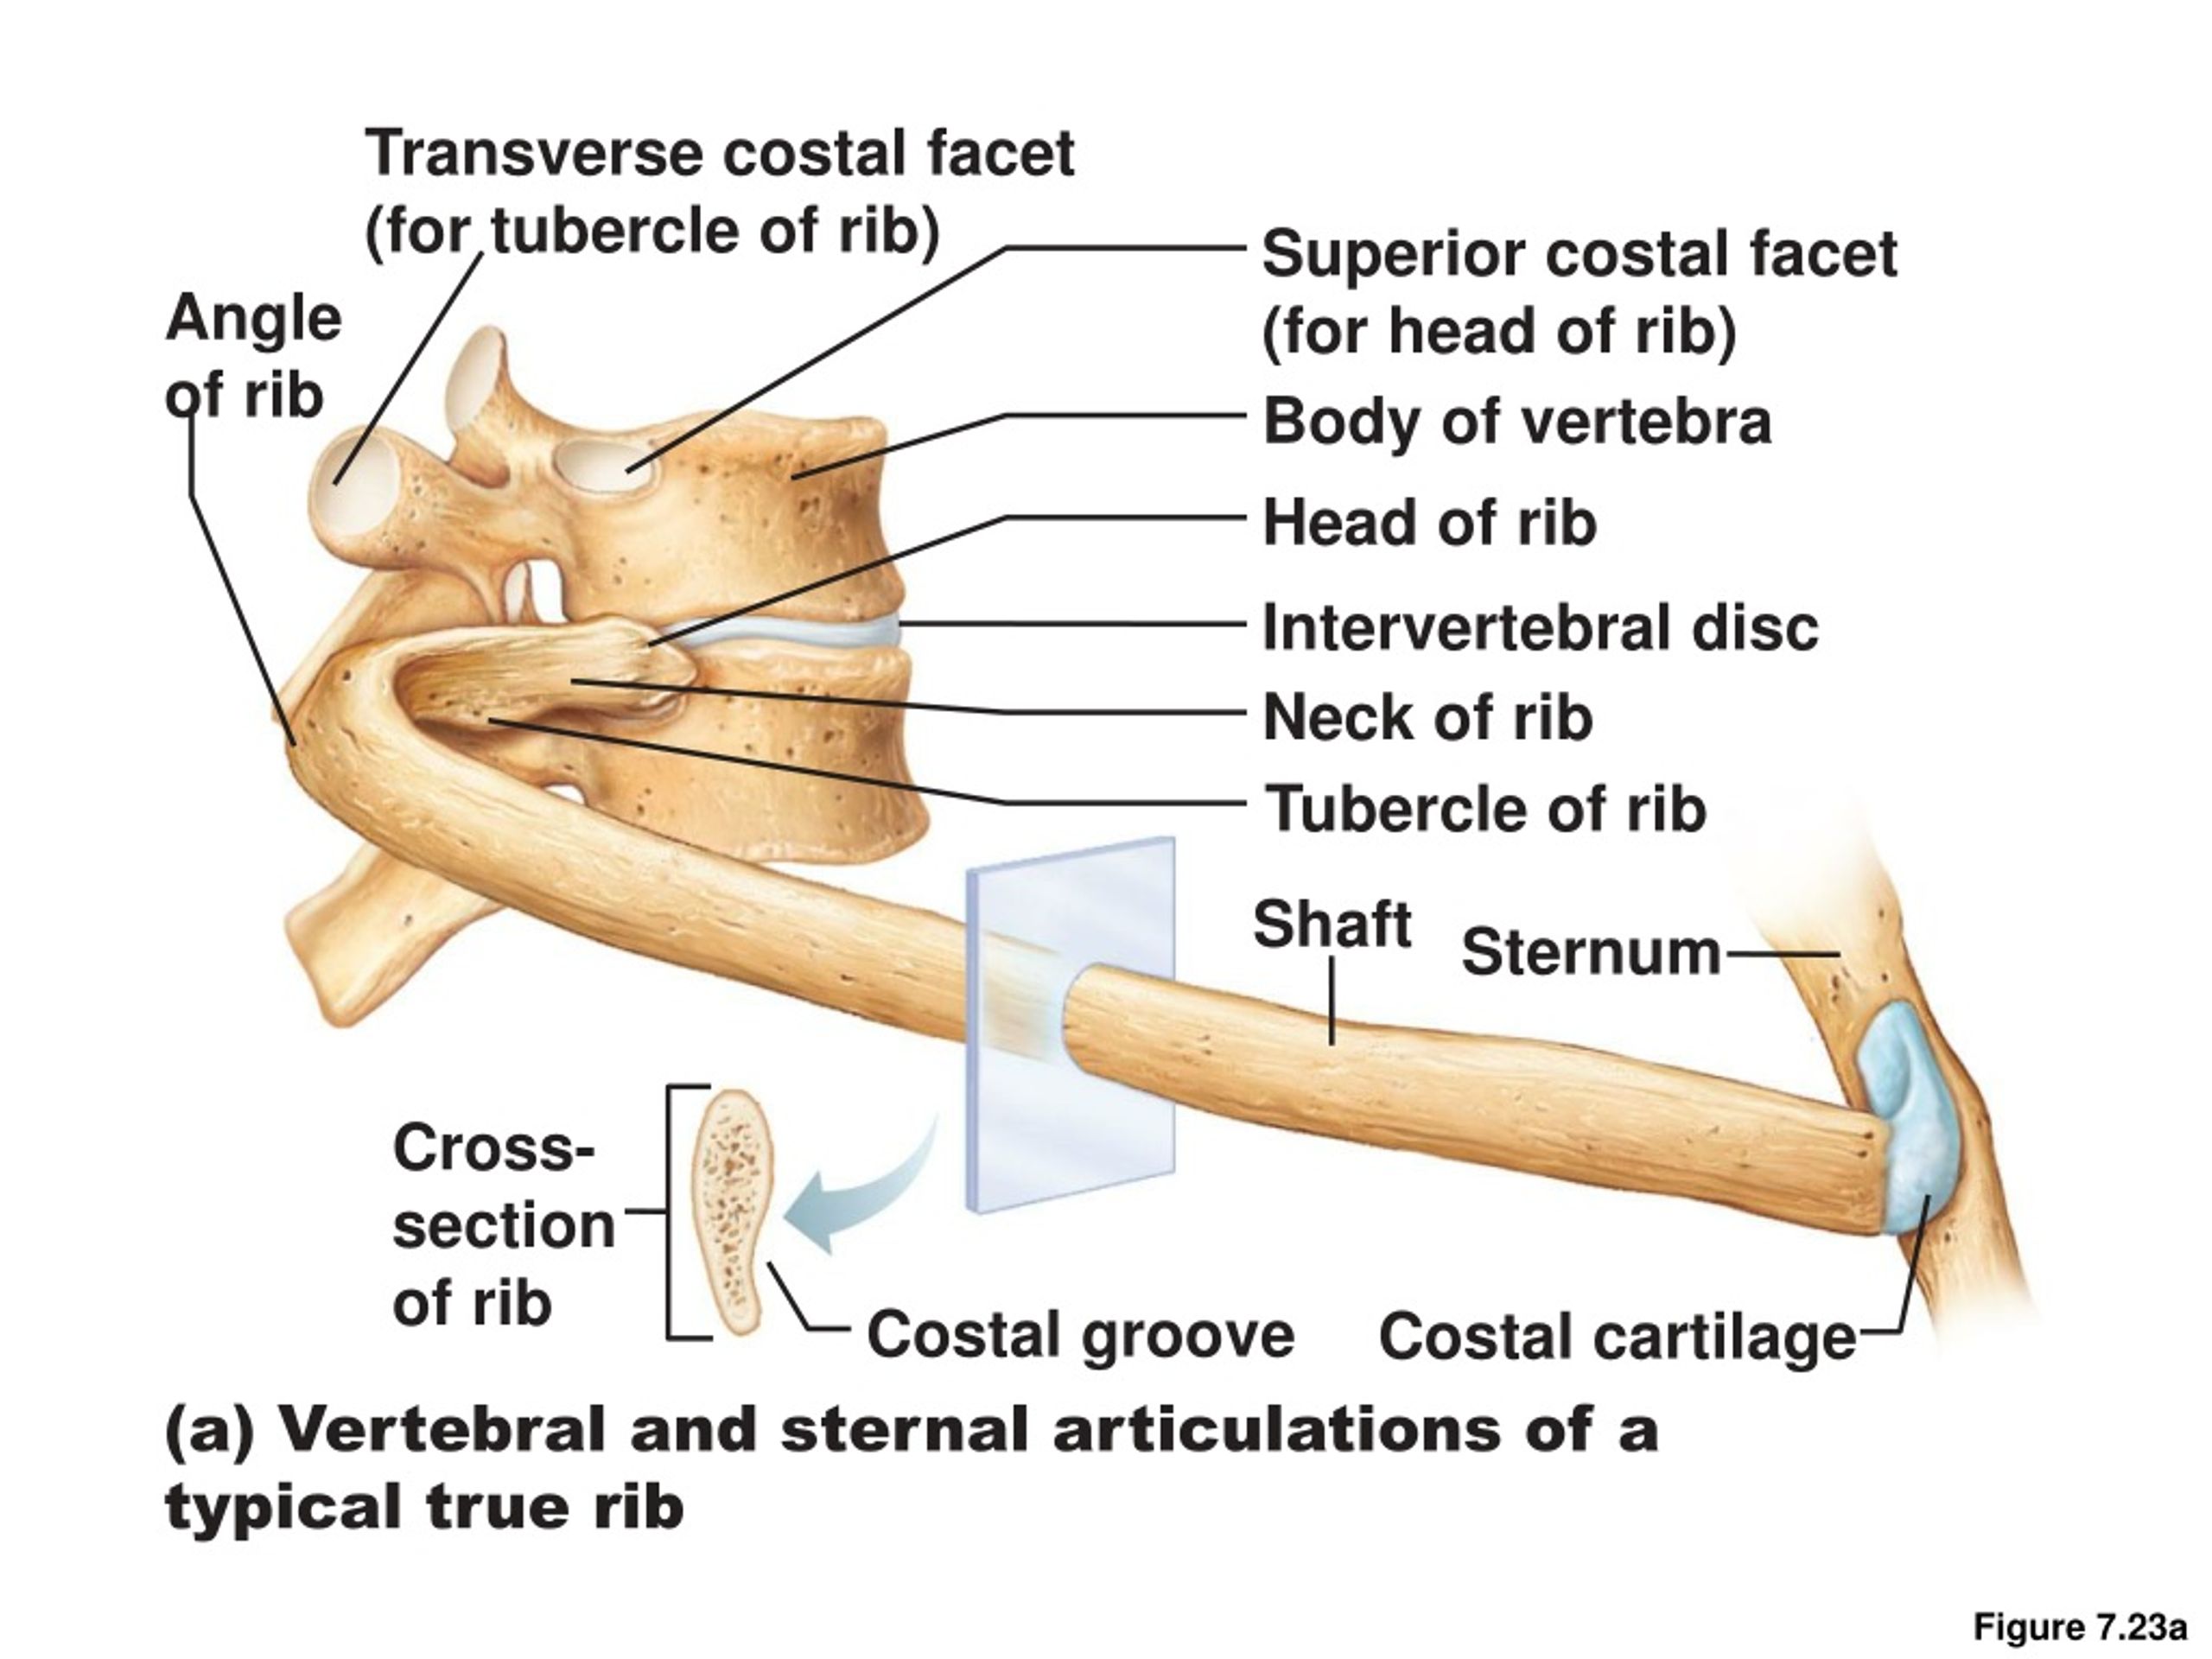 transverse costal facet for tubercle of rib.